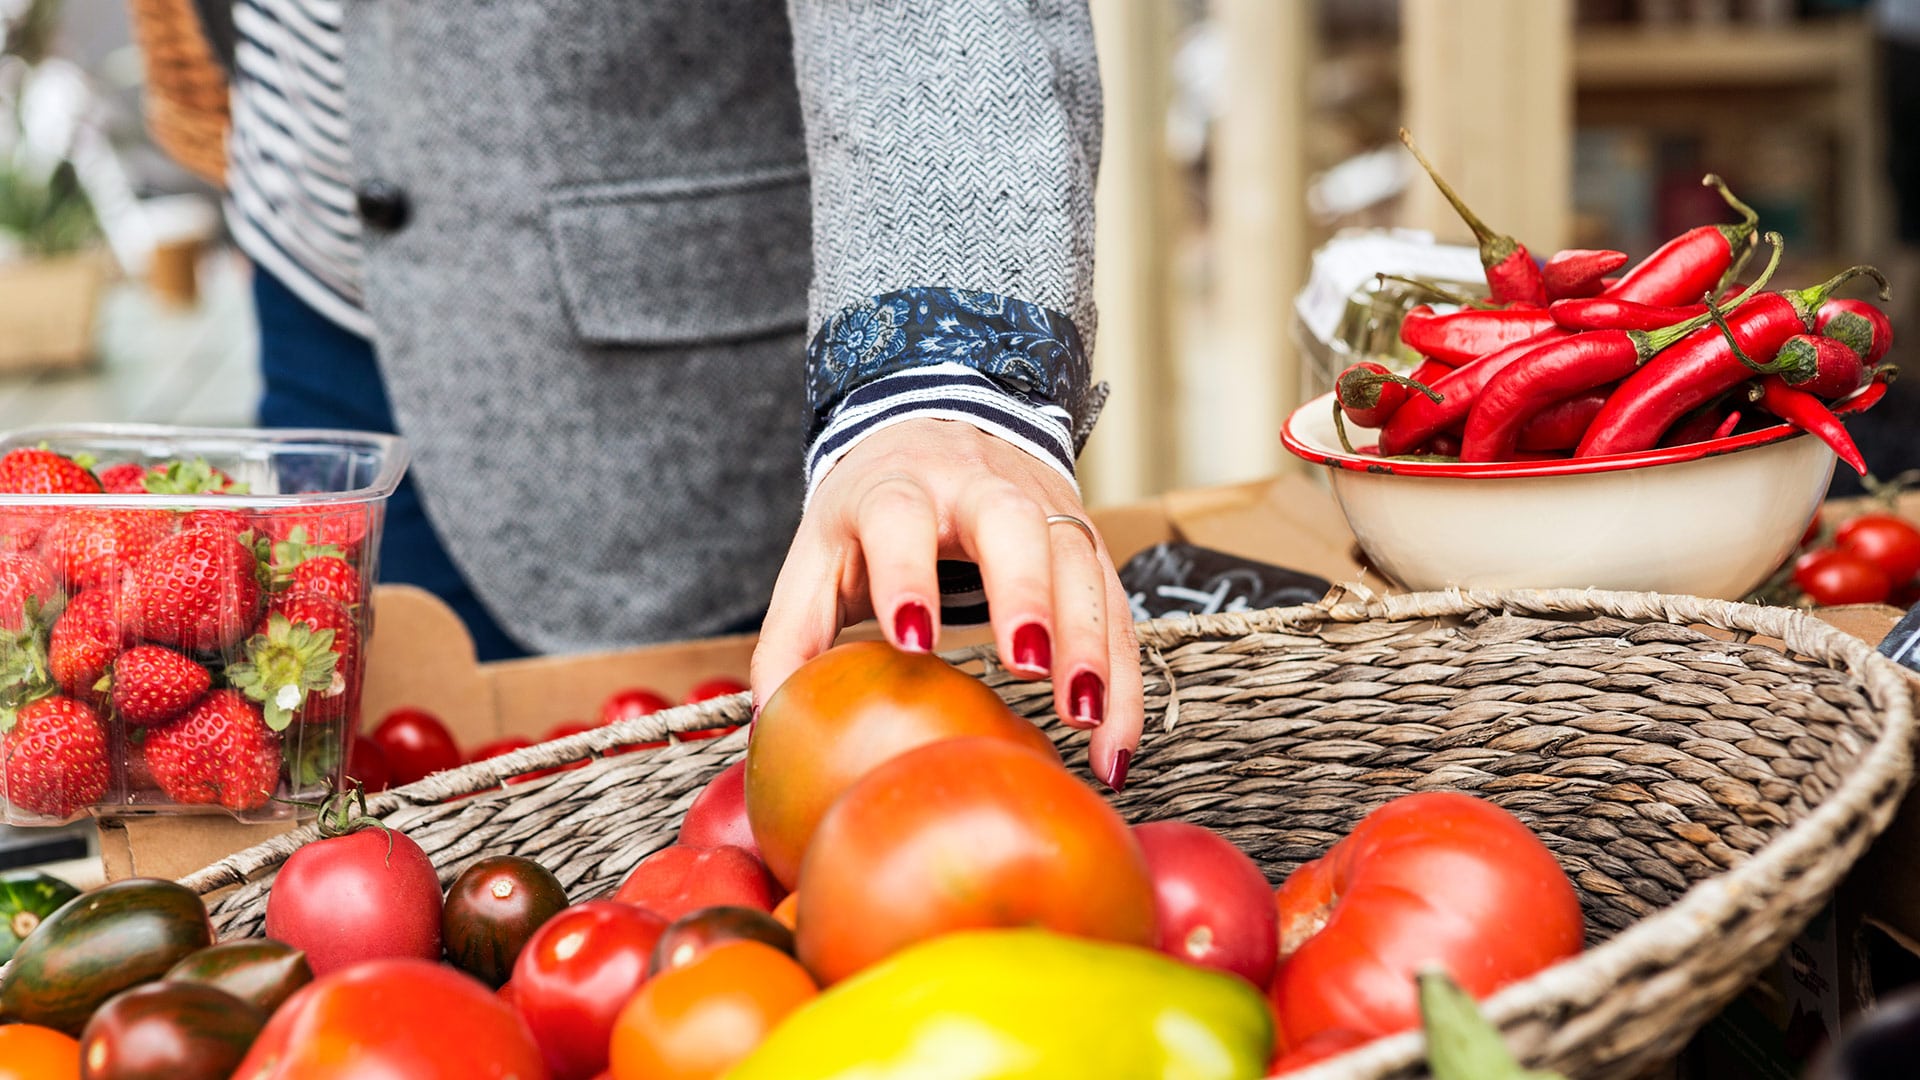 Woman picking up tomato from basket